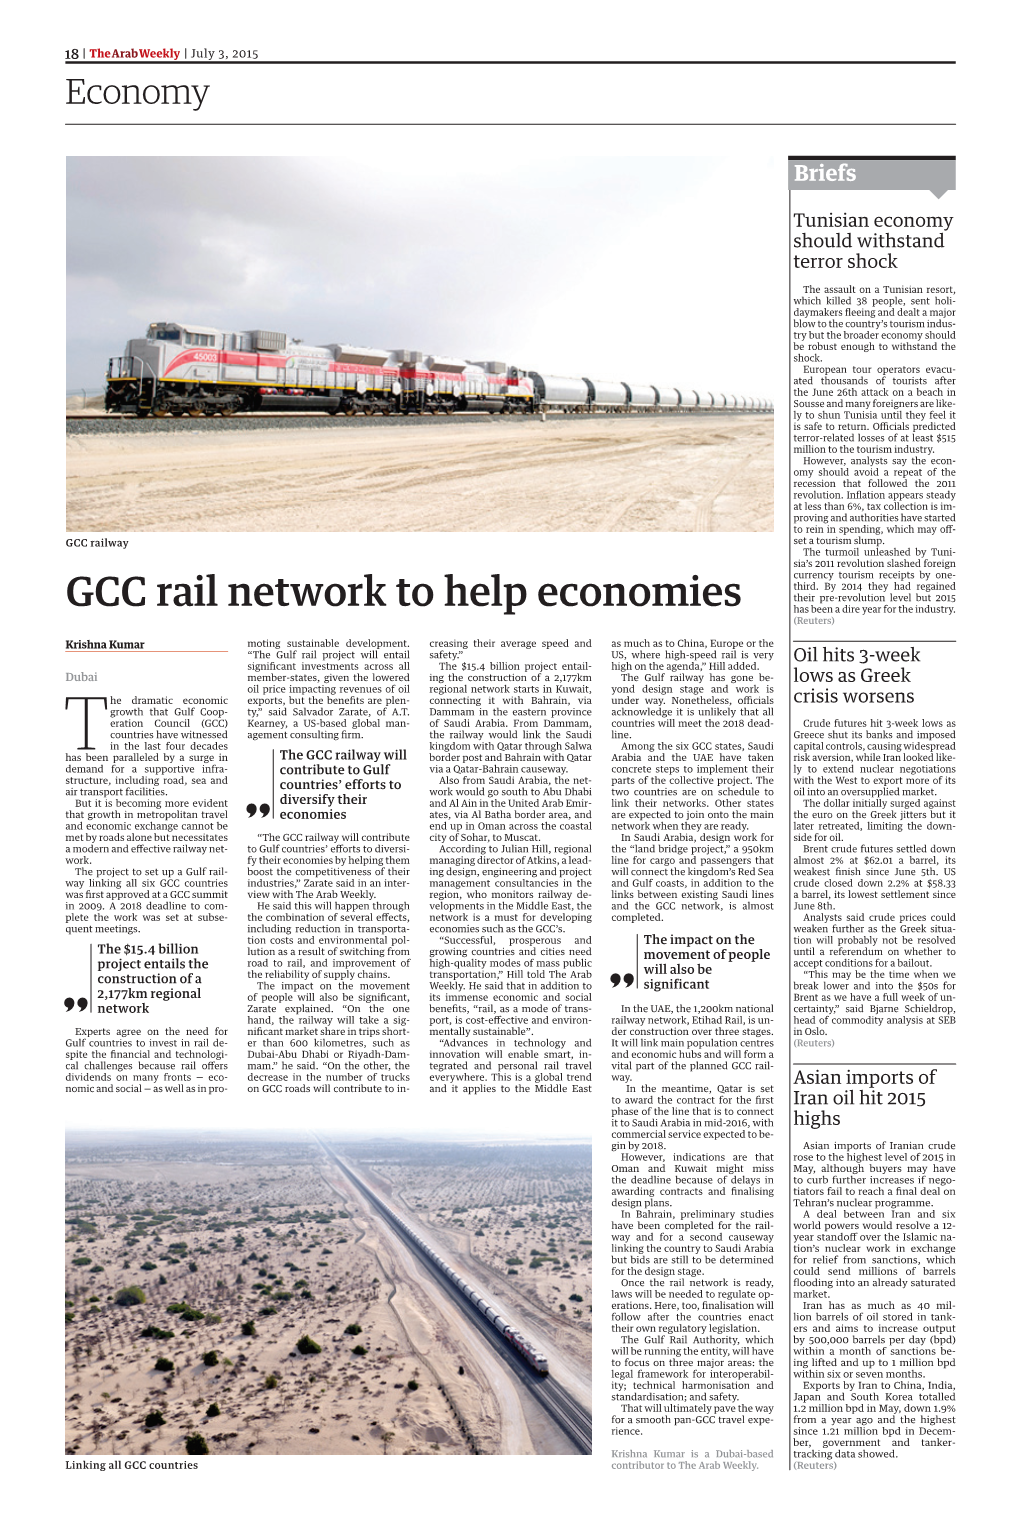 GCC Rail Network to Help Economies Has Been a Dire Year for the Industry